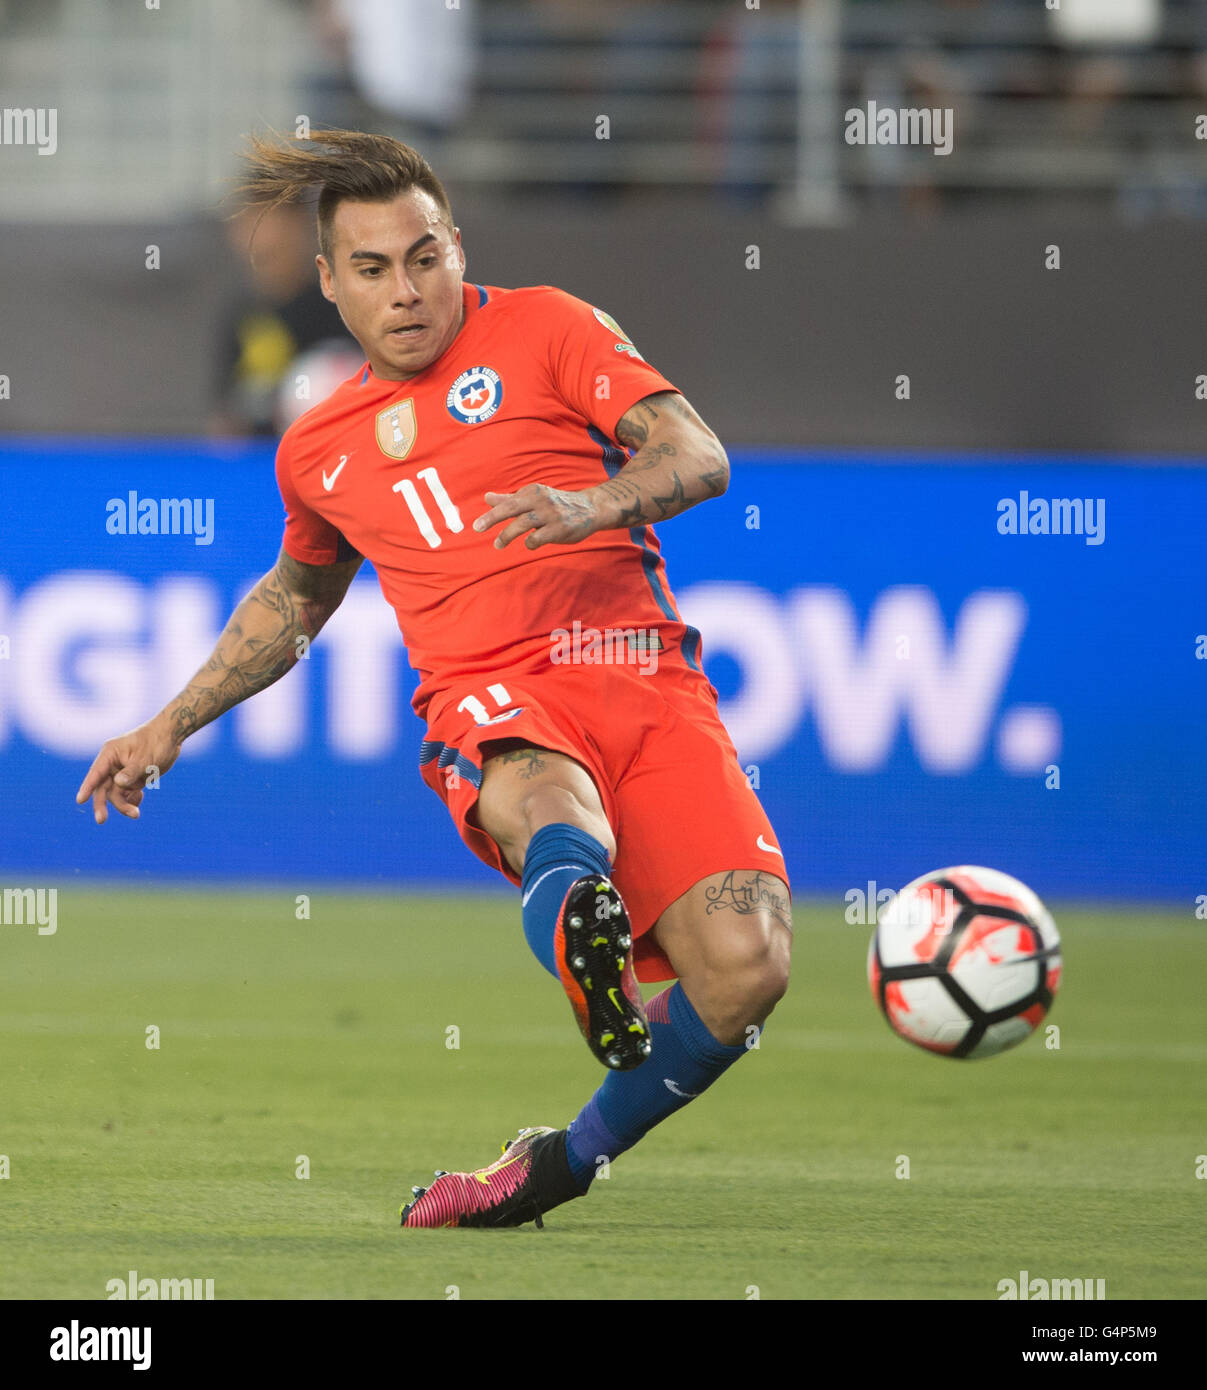 Santa Clara, USA. 18th June, 2016. Eduardo Vargas of Chile scores during the quarterfinal match against Mexico of 2016 Copa America soccer tournament at the Levi's Stadium in Santa Clara, California, the United States, June 18, 2016. Chile won 7-0. Credit:  Yang Lei/Xinhua/Alamy Live News Stock Photo